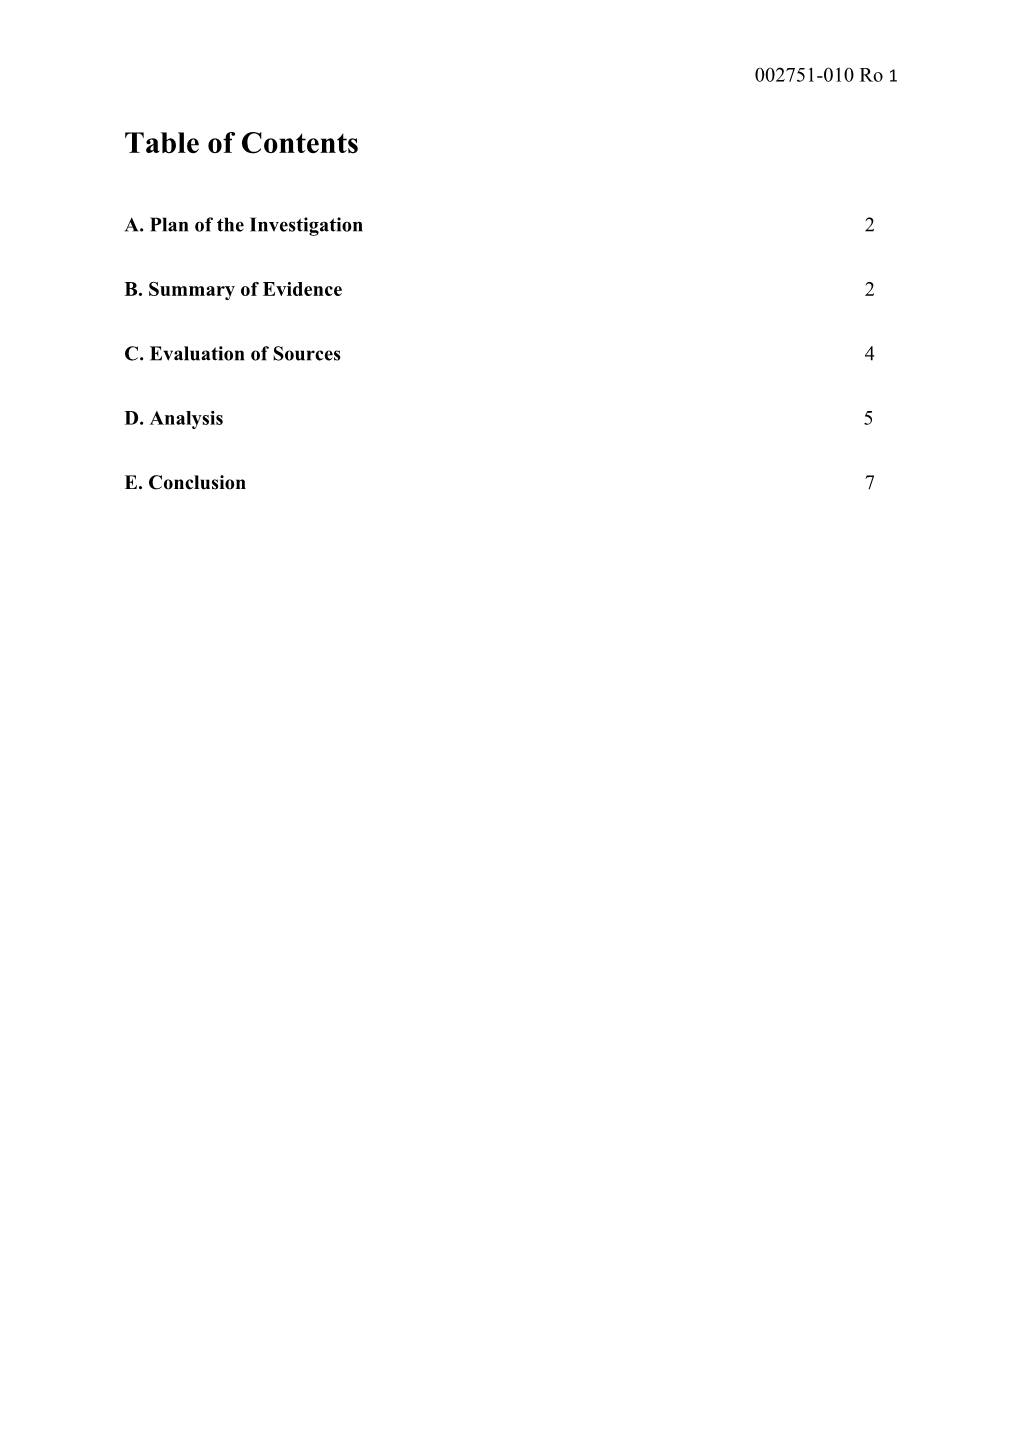 Table of Contents s529